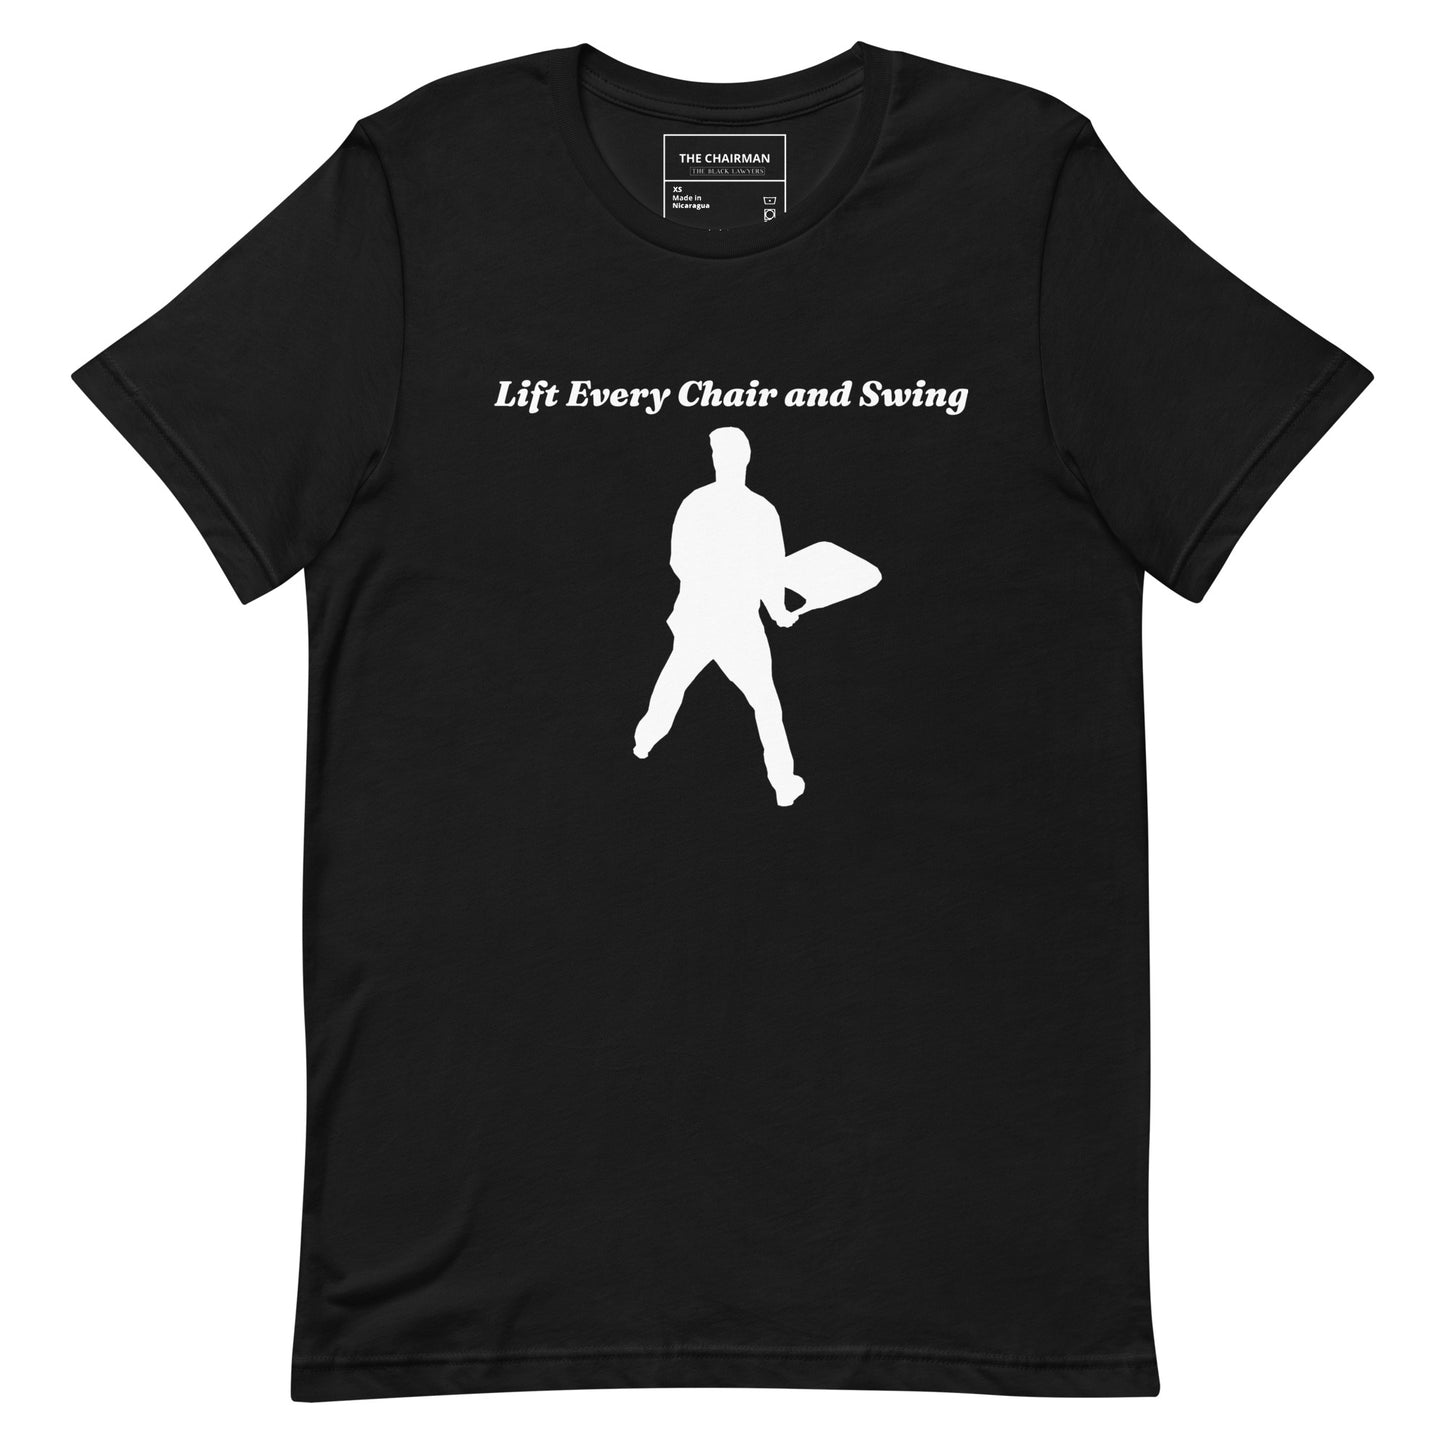 Lift Every Chair and Swing Unisex t-shirt